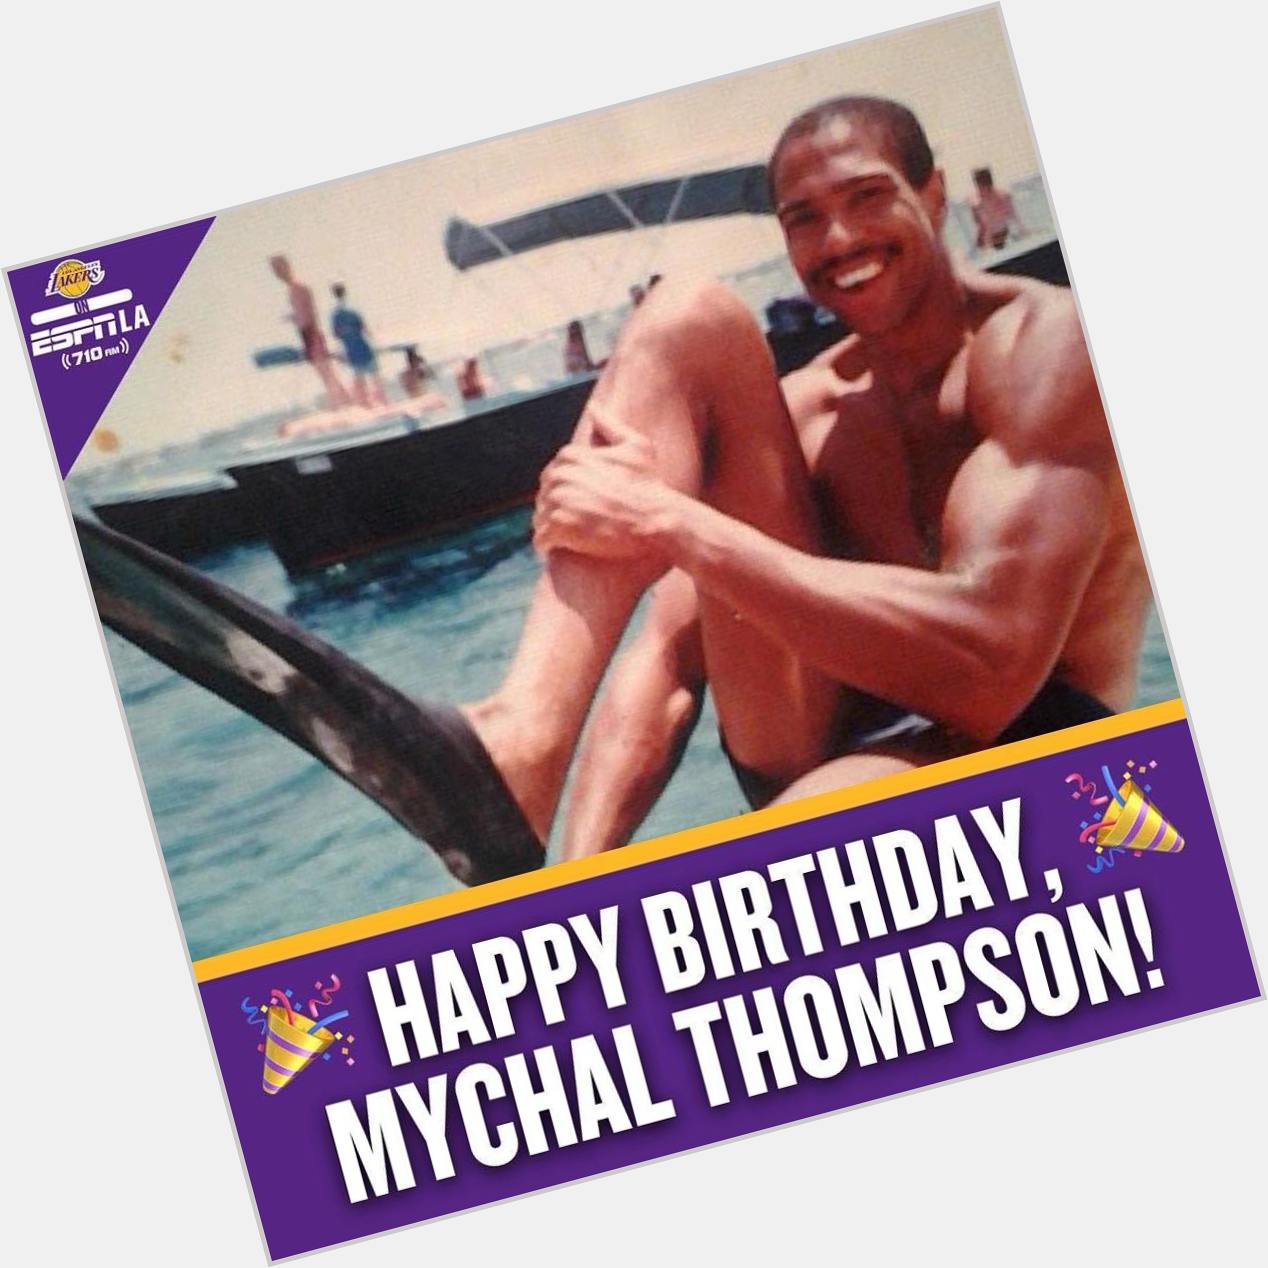 Join us in wishing a very HAPPY BIRTHDAY to Bahamas finest, Mychal Thompson! 